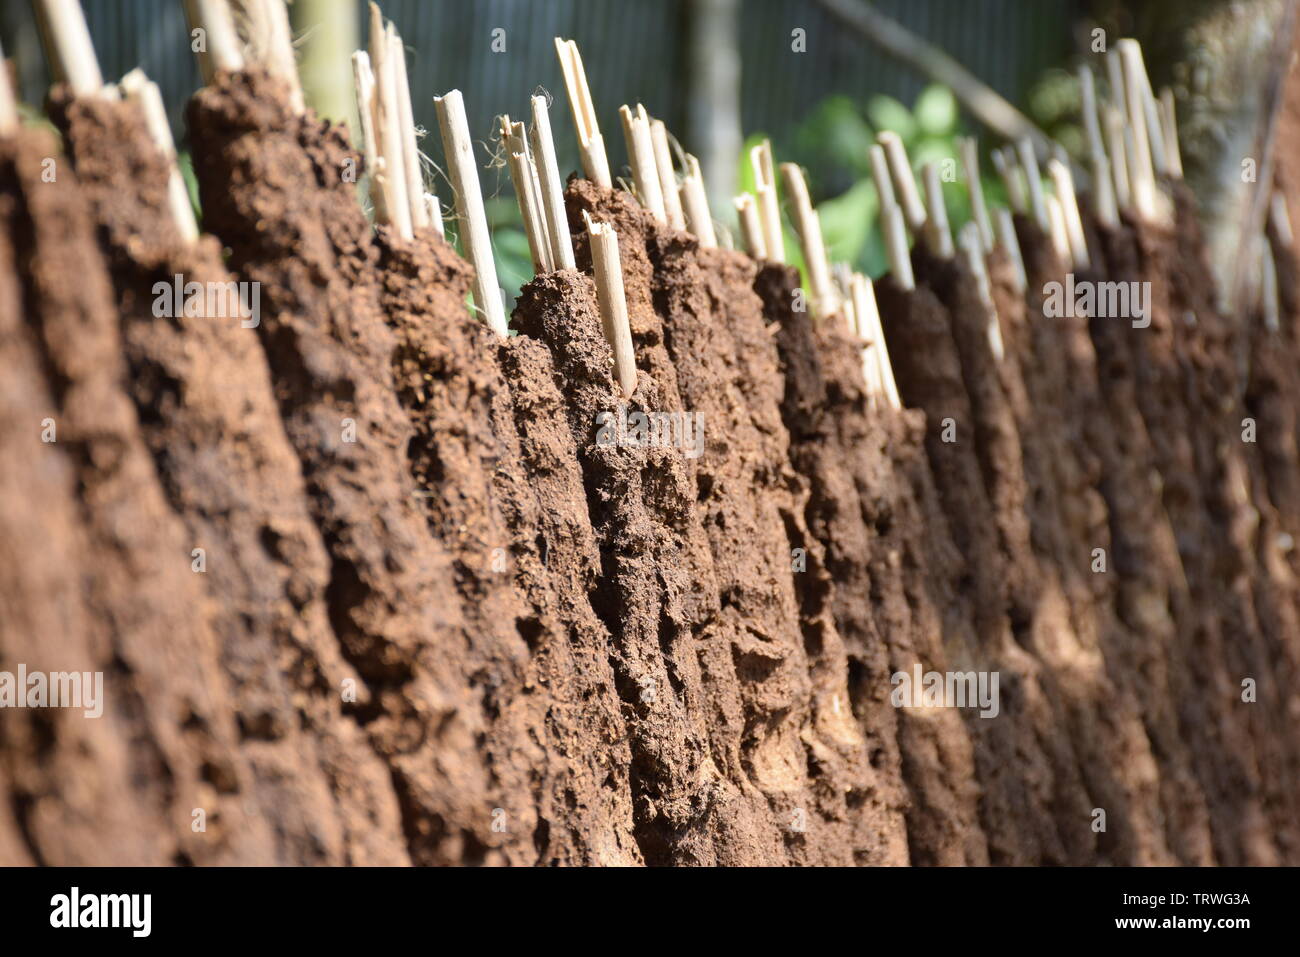 cow dung jute stick fuel: indigenous fuel technology in rural south asia made from cow dung and jute stick, dried and used for domestic cooking. Stock Photo